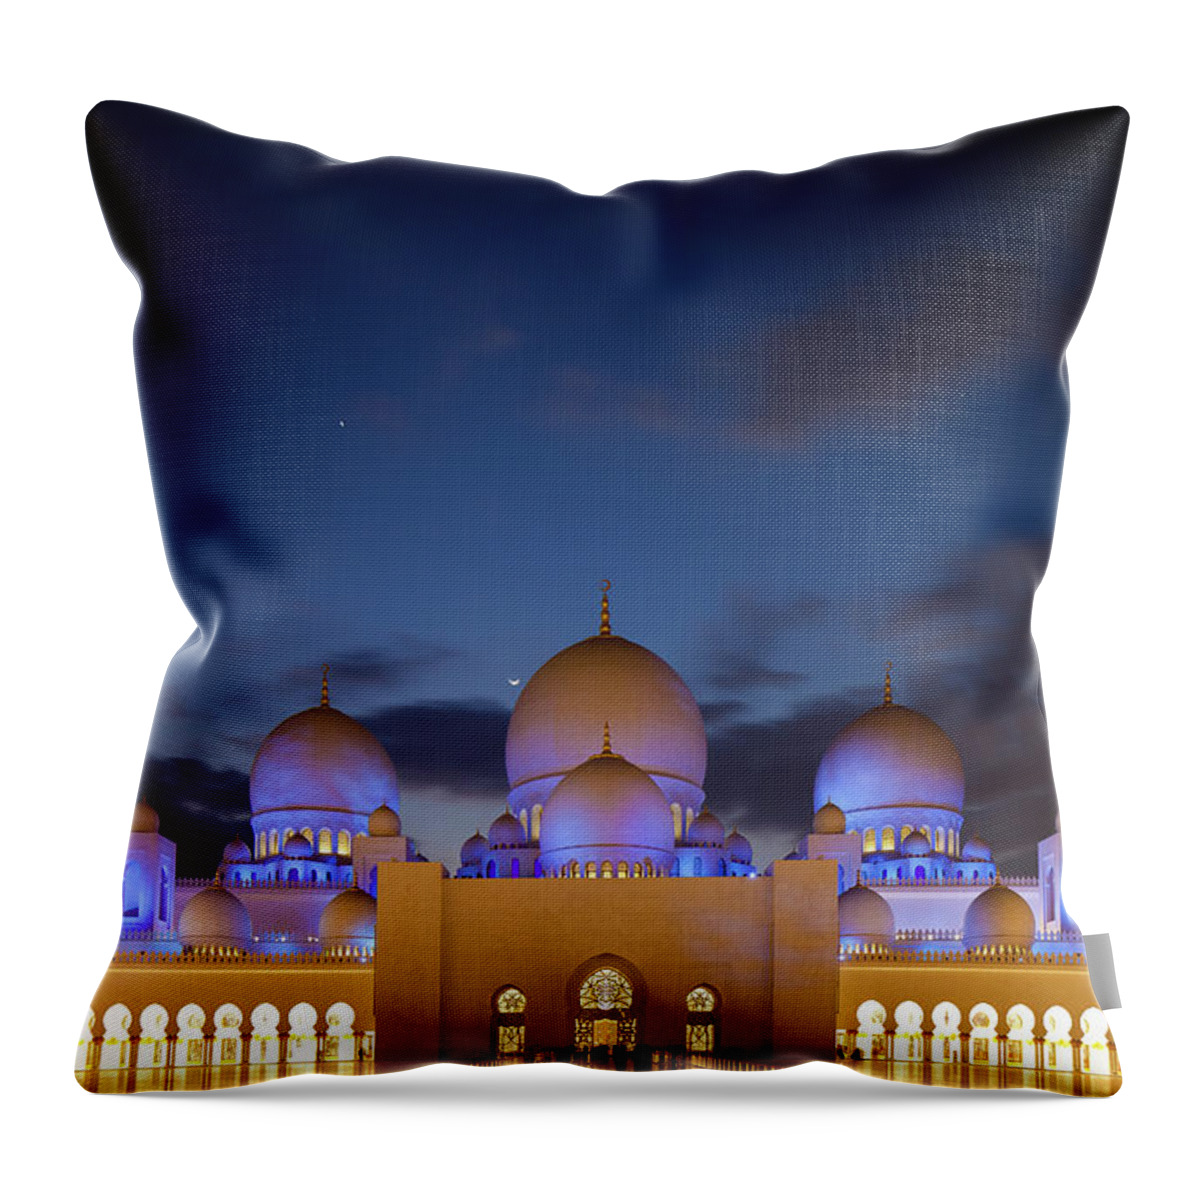 Tranquility Throw Pillow featuring the photograph Sheikh Zayed Grand Mosque by Figurative Speech